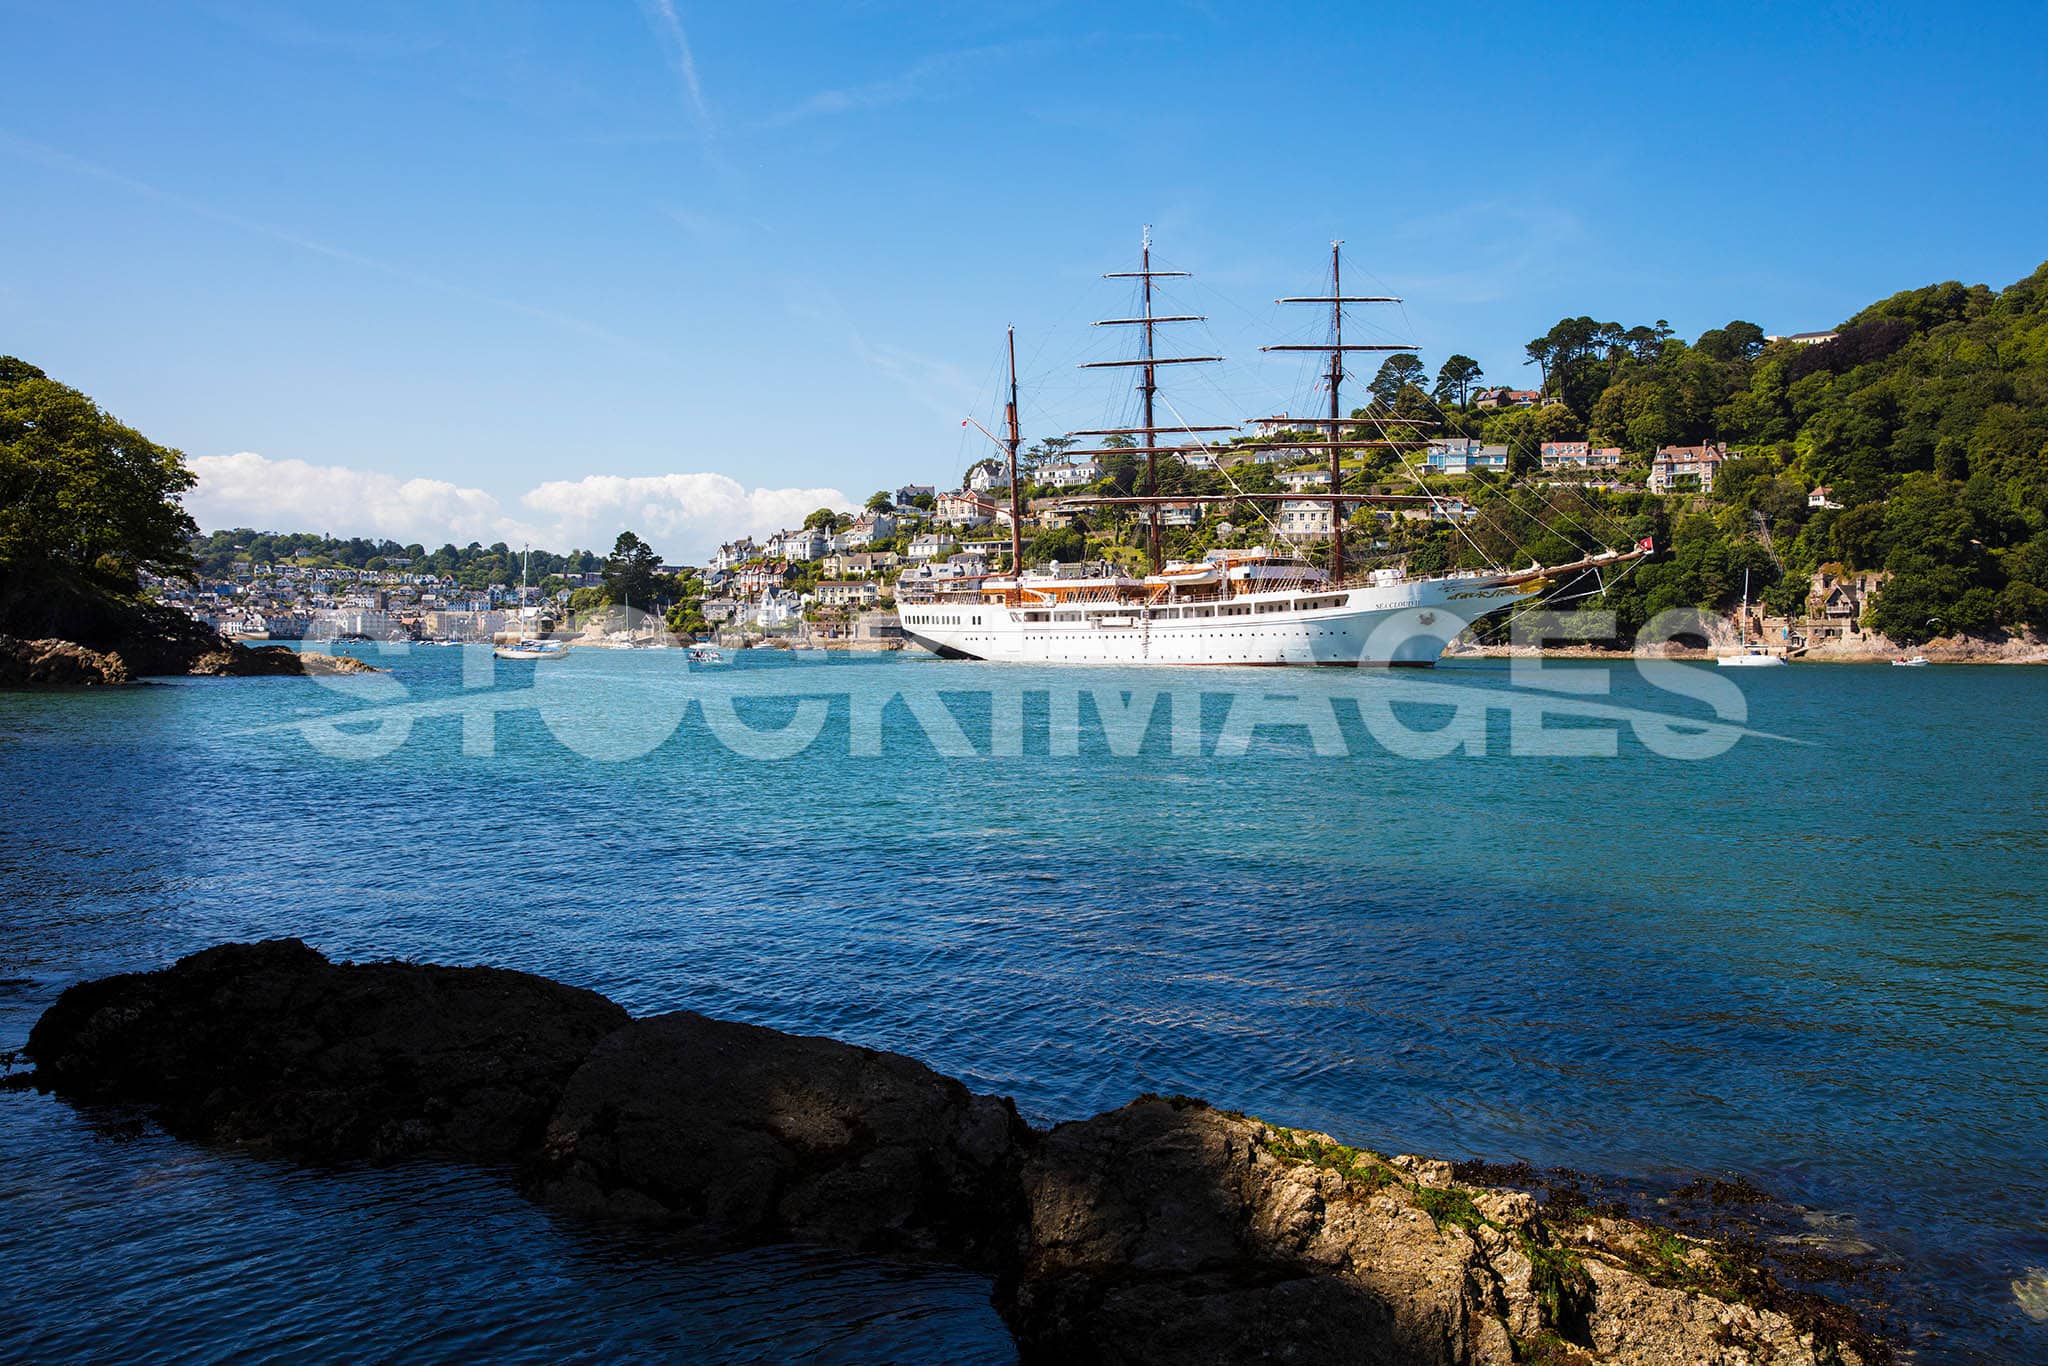 Sea Cloud II leaving Dartmouth in the afternoon summer sunshine.